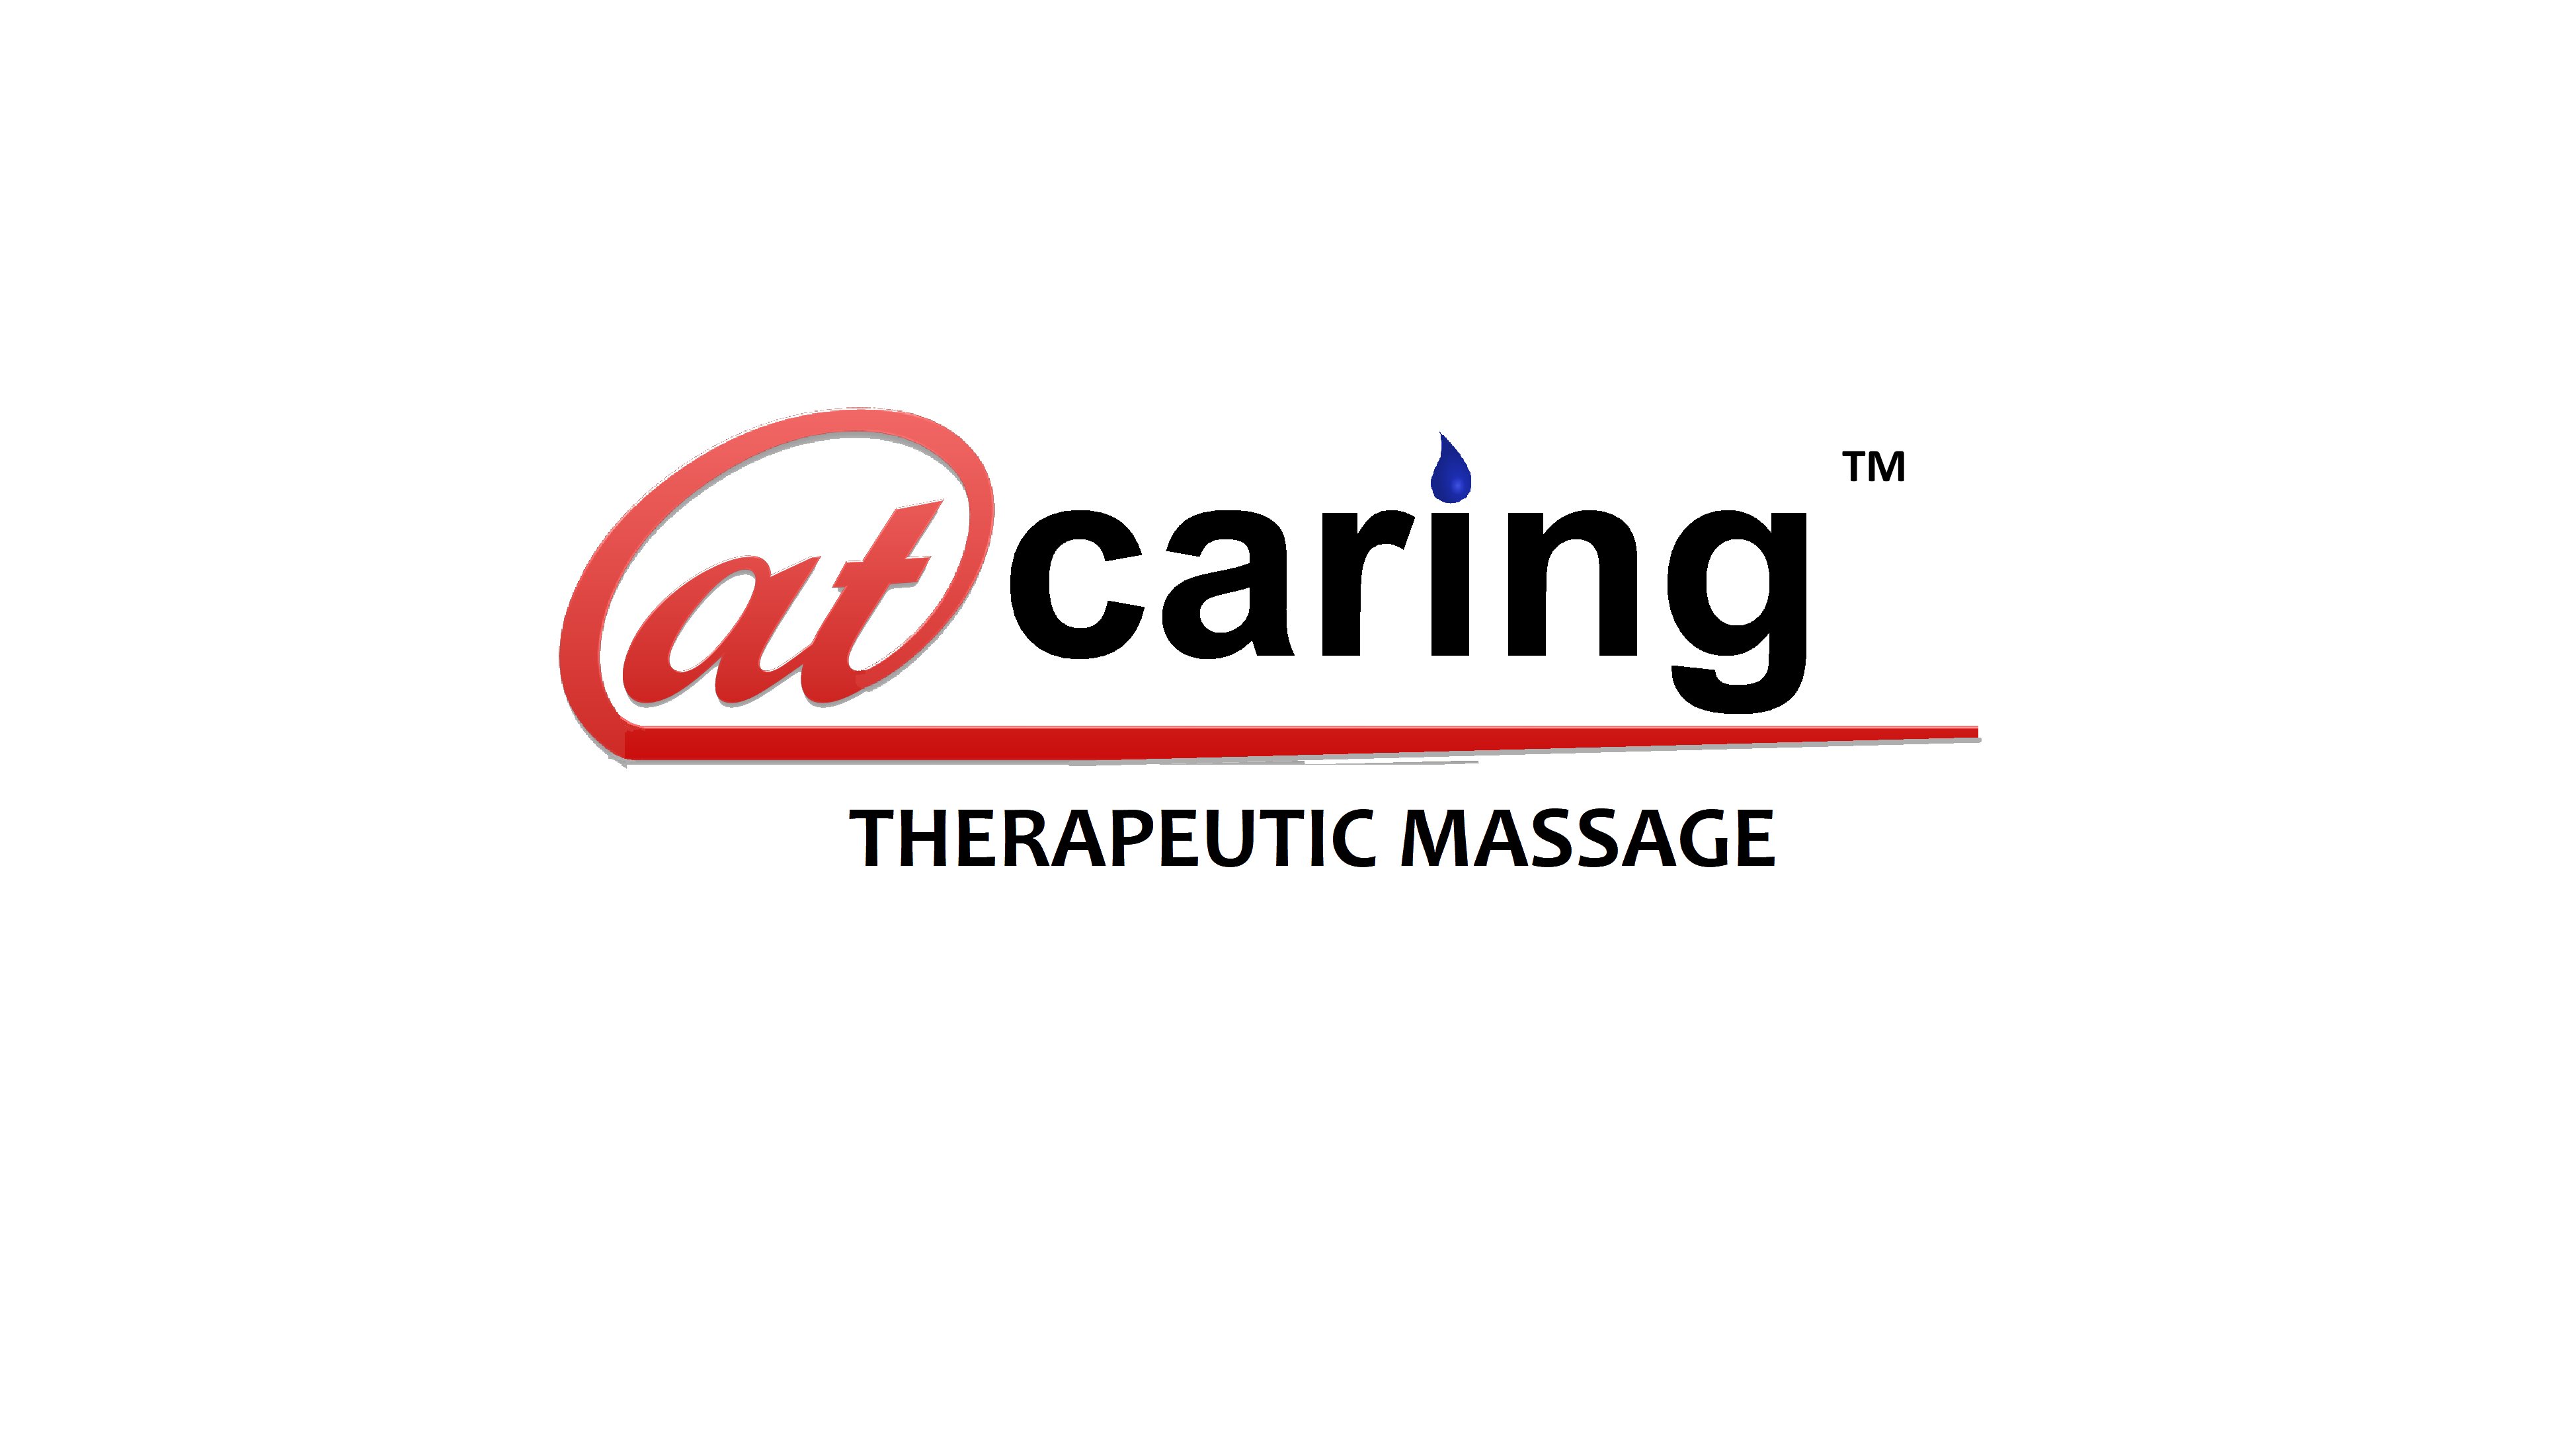 Welcome to ATCARING THERAPEUTIC MASSAGE, LLC™ where we provide therapeutic massage.
